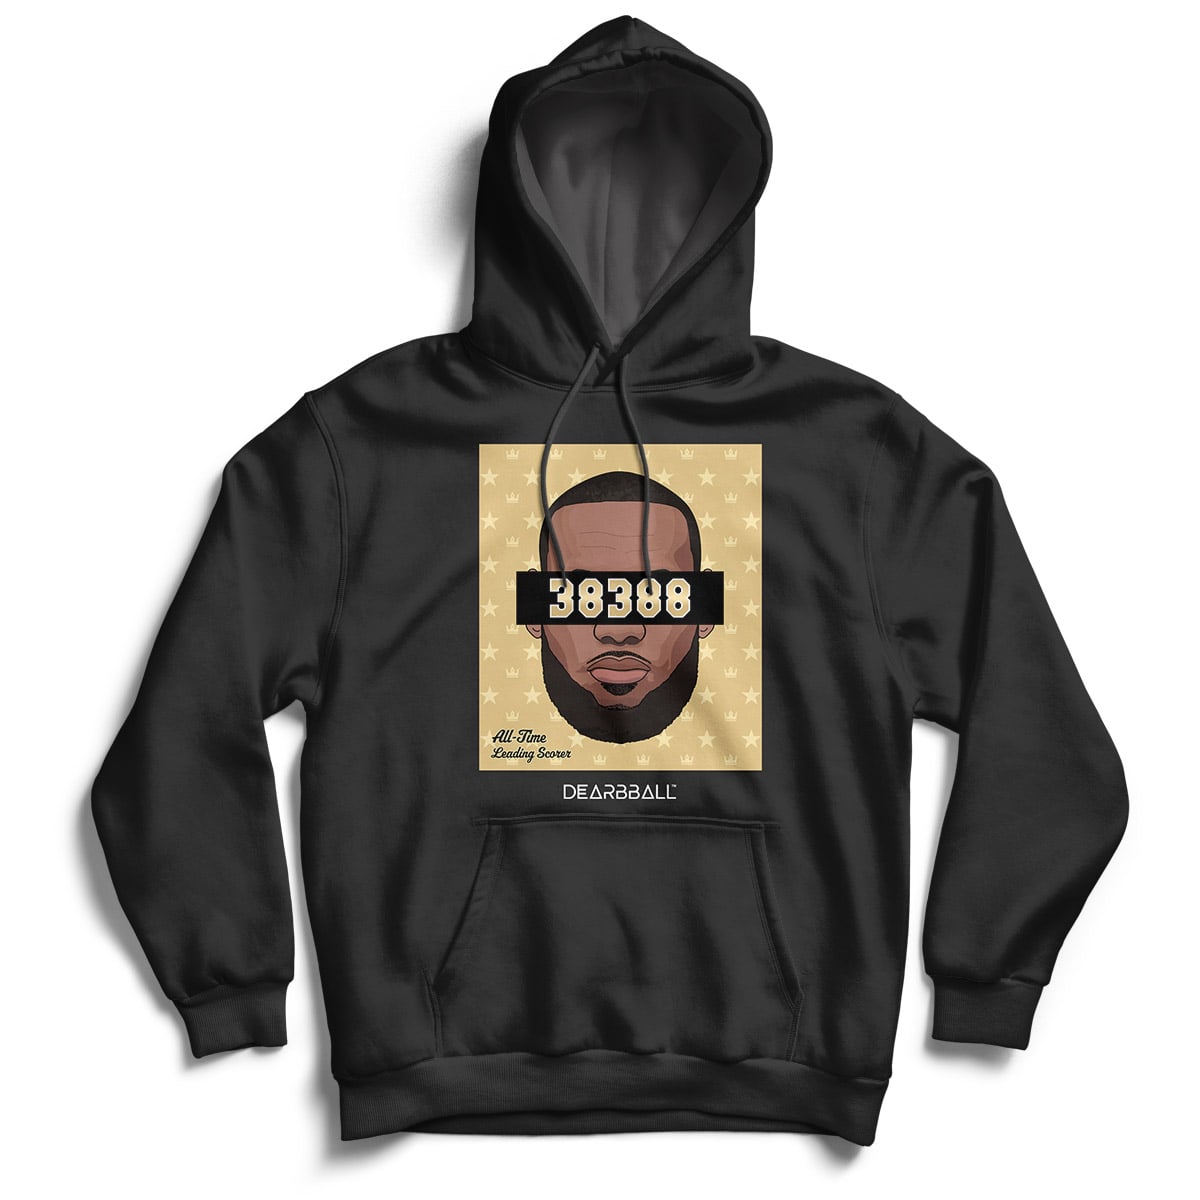 [ENFANT] DearBBall Sweat à Capuche - King Record 38388 Edition